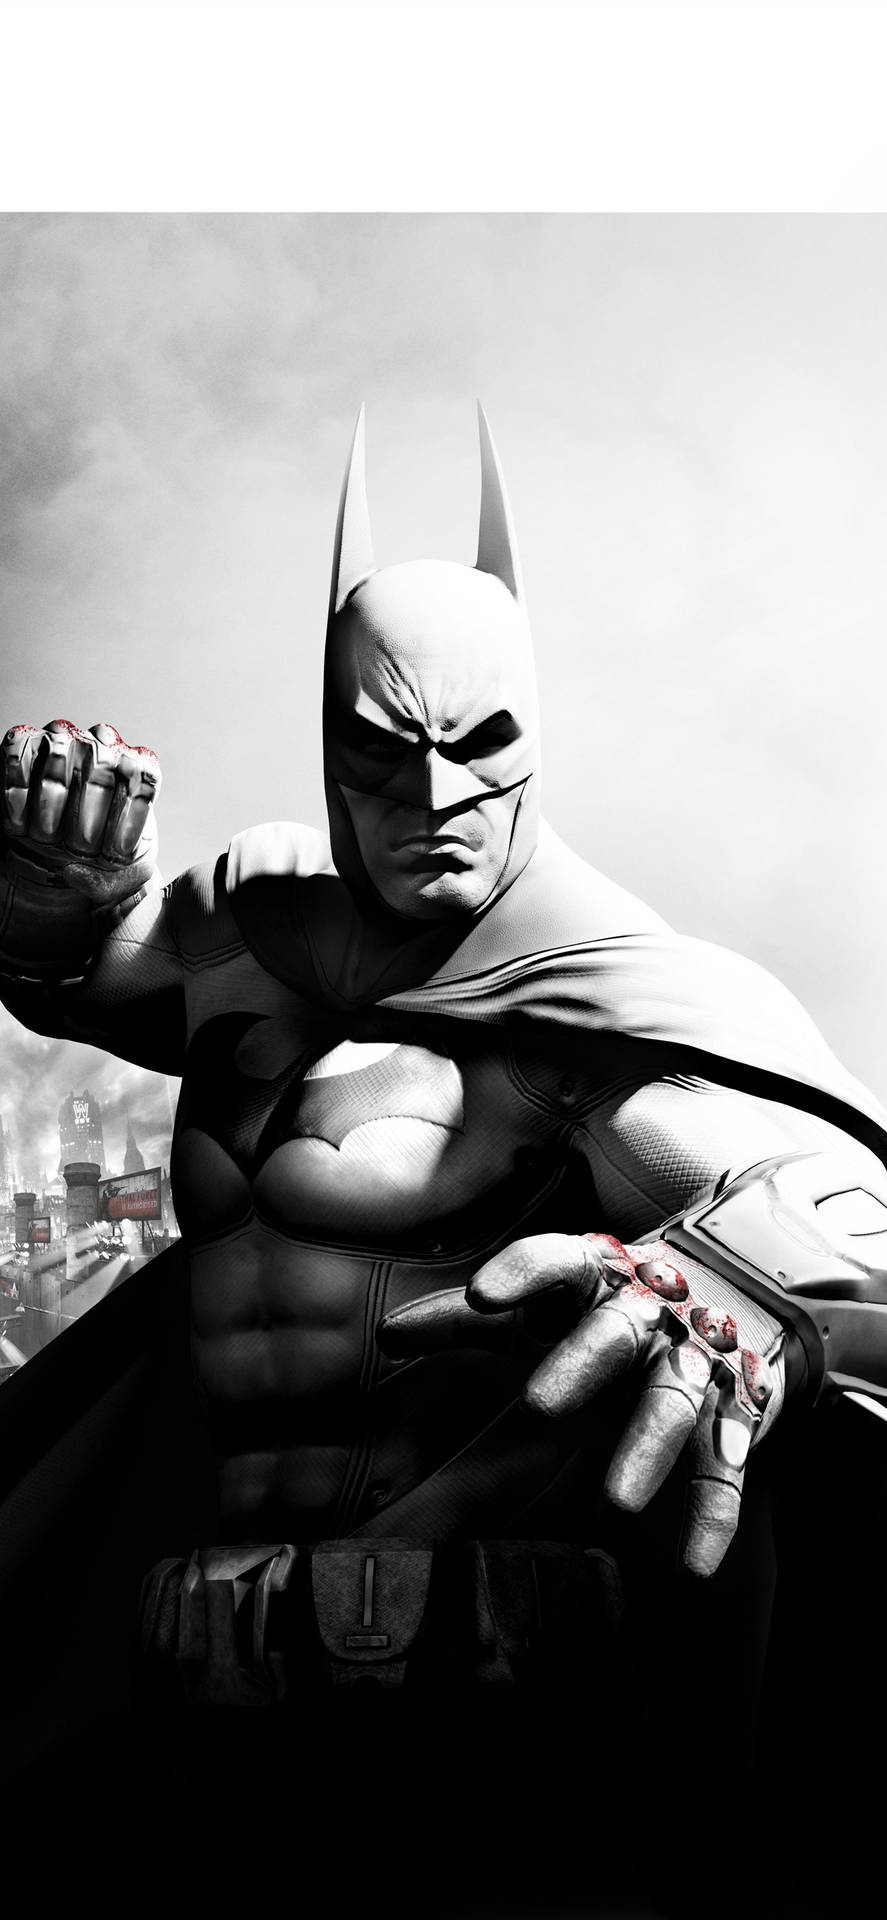 Batman Arkham Iphone With Bloodied Knuckles